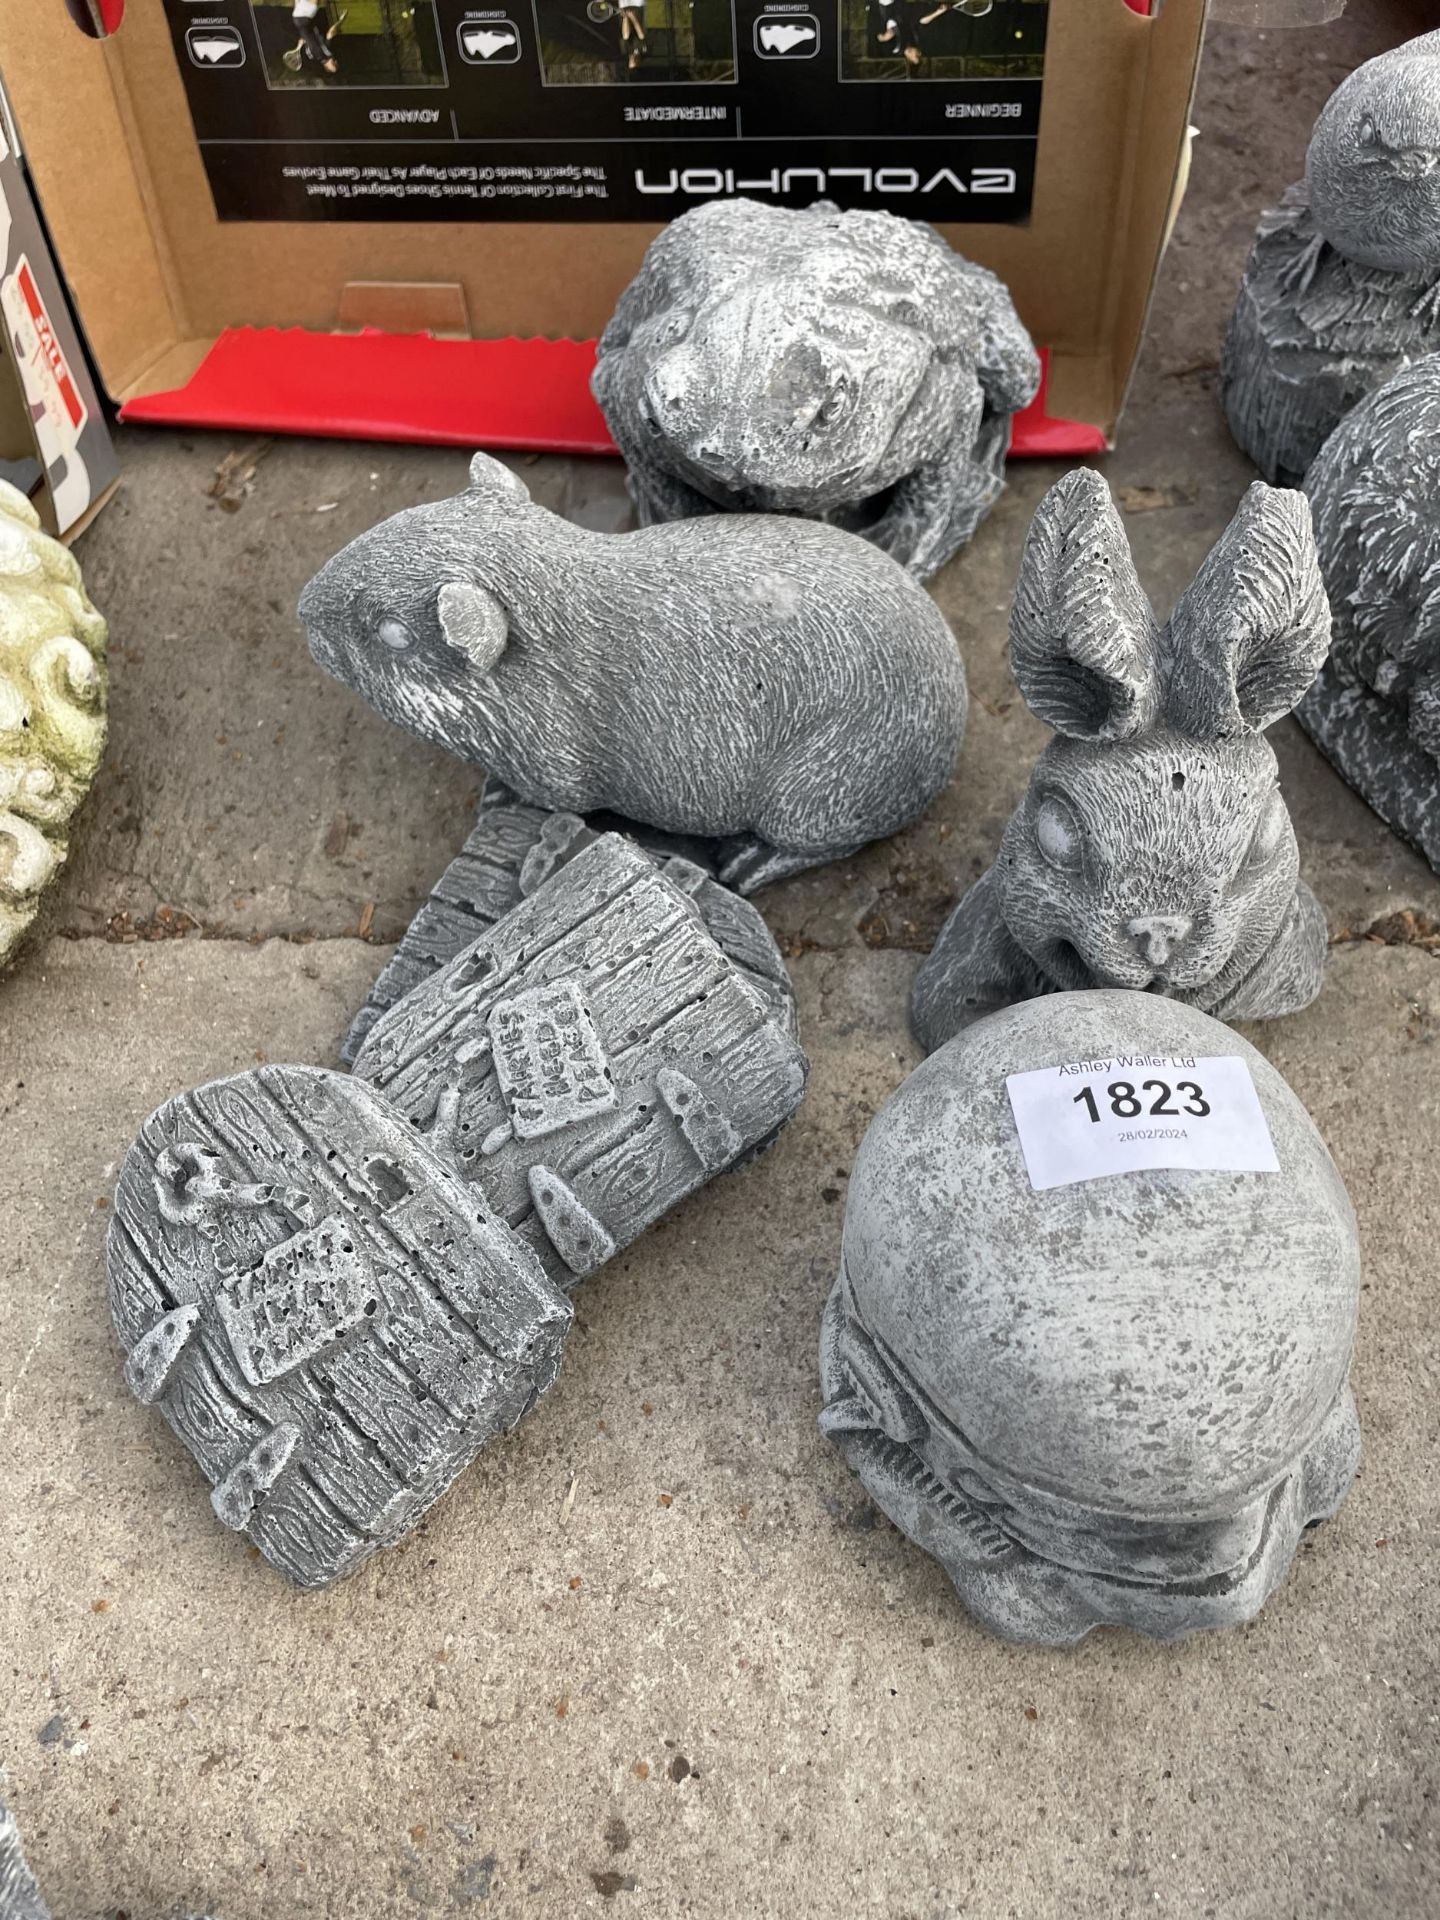 FIVE VARIOUS SMALL CONCRETE GARDEN FIGURES TO INCLUDE DARTH VADER AND A FROG ETC